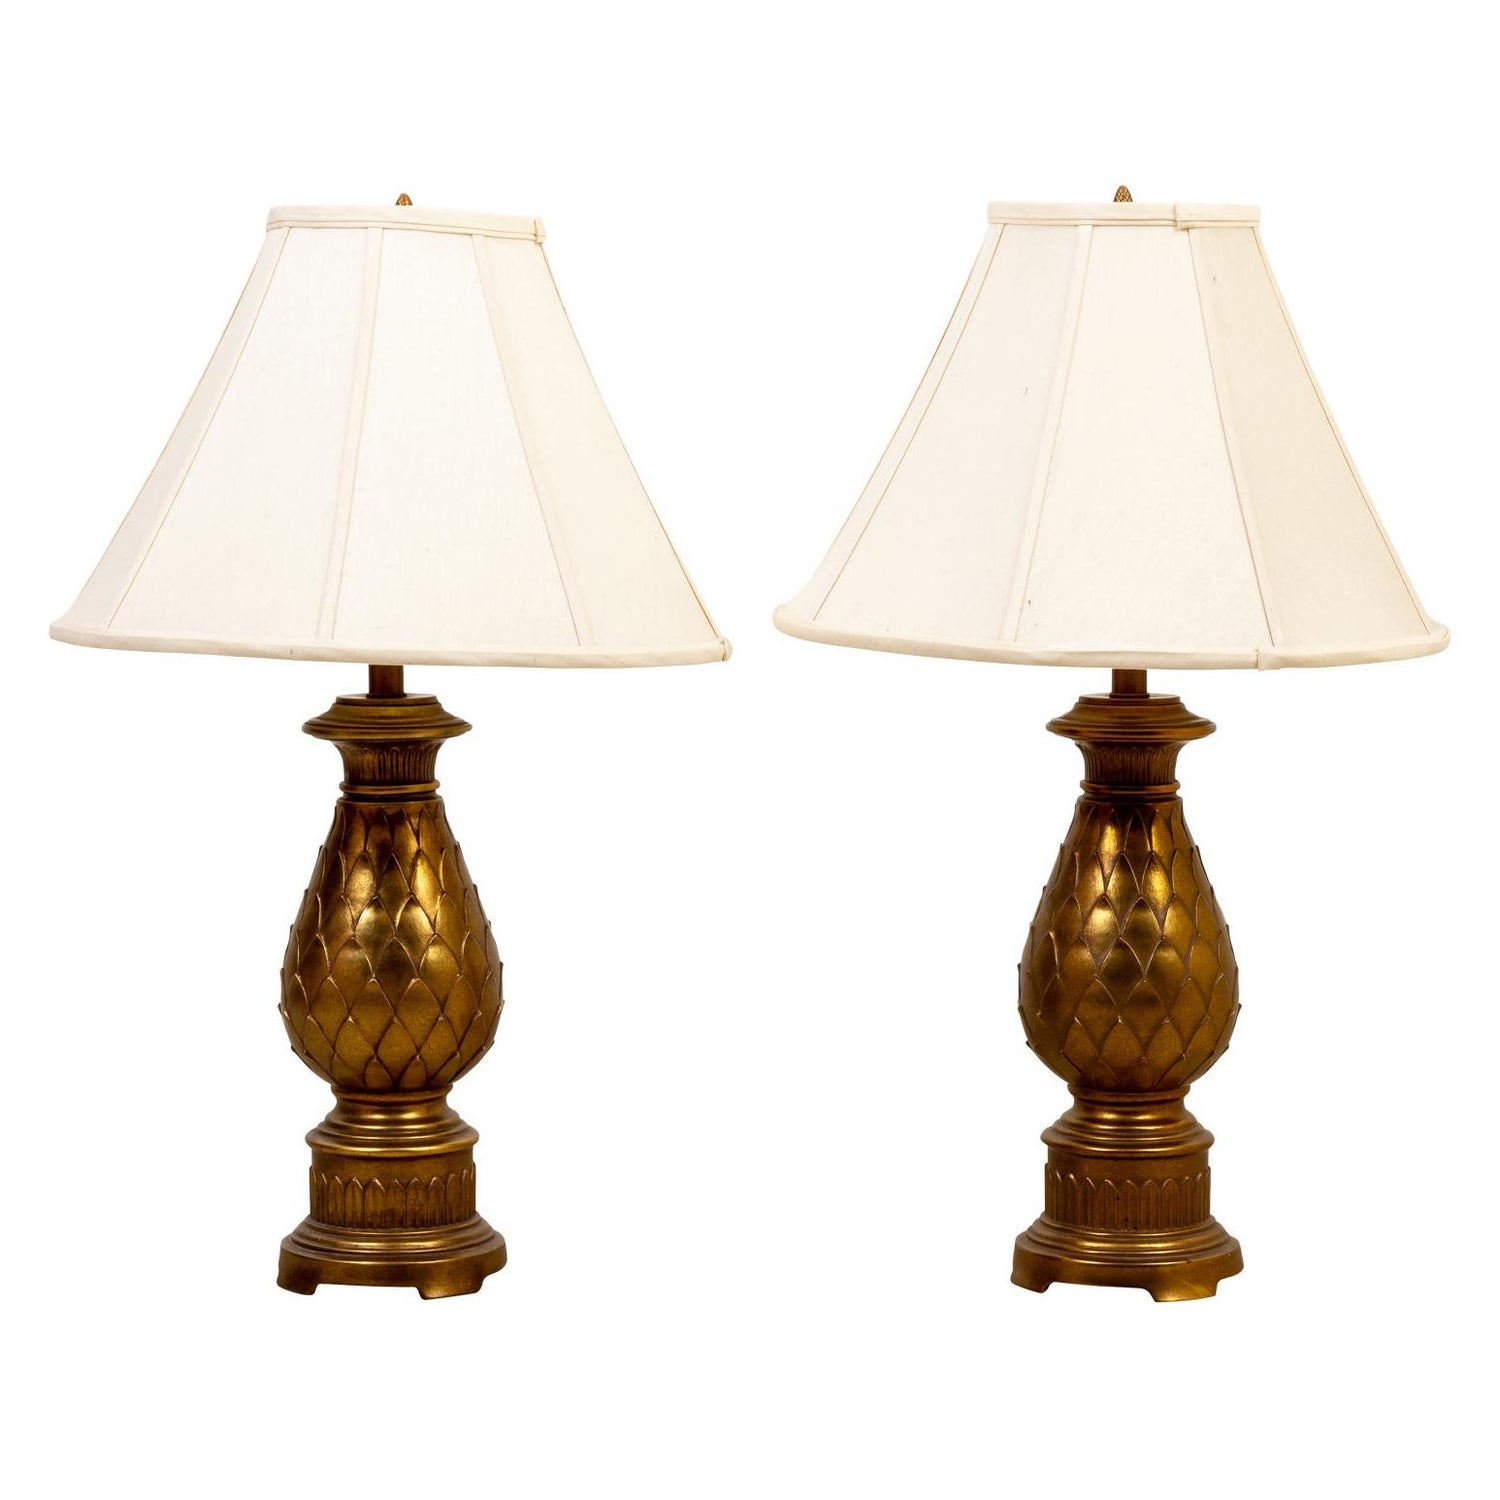 Pair Of Brass Barley Twist Table Lamps, Barley Twist Table Lamp Finish Antique Brass